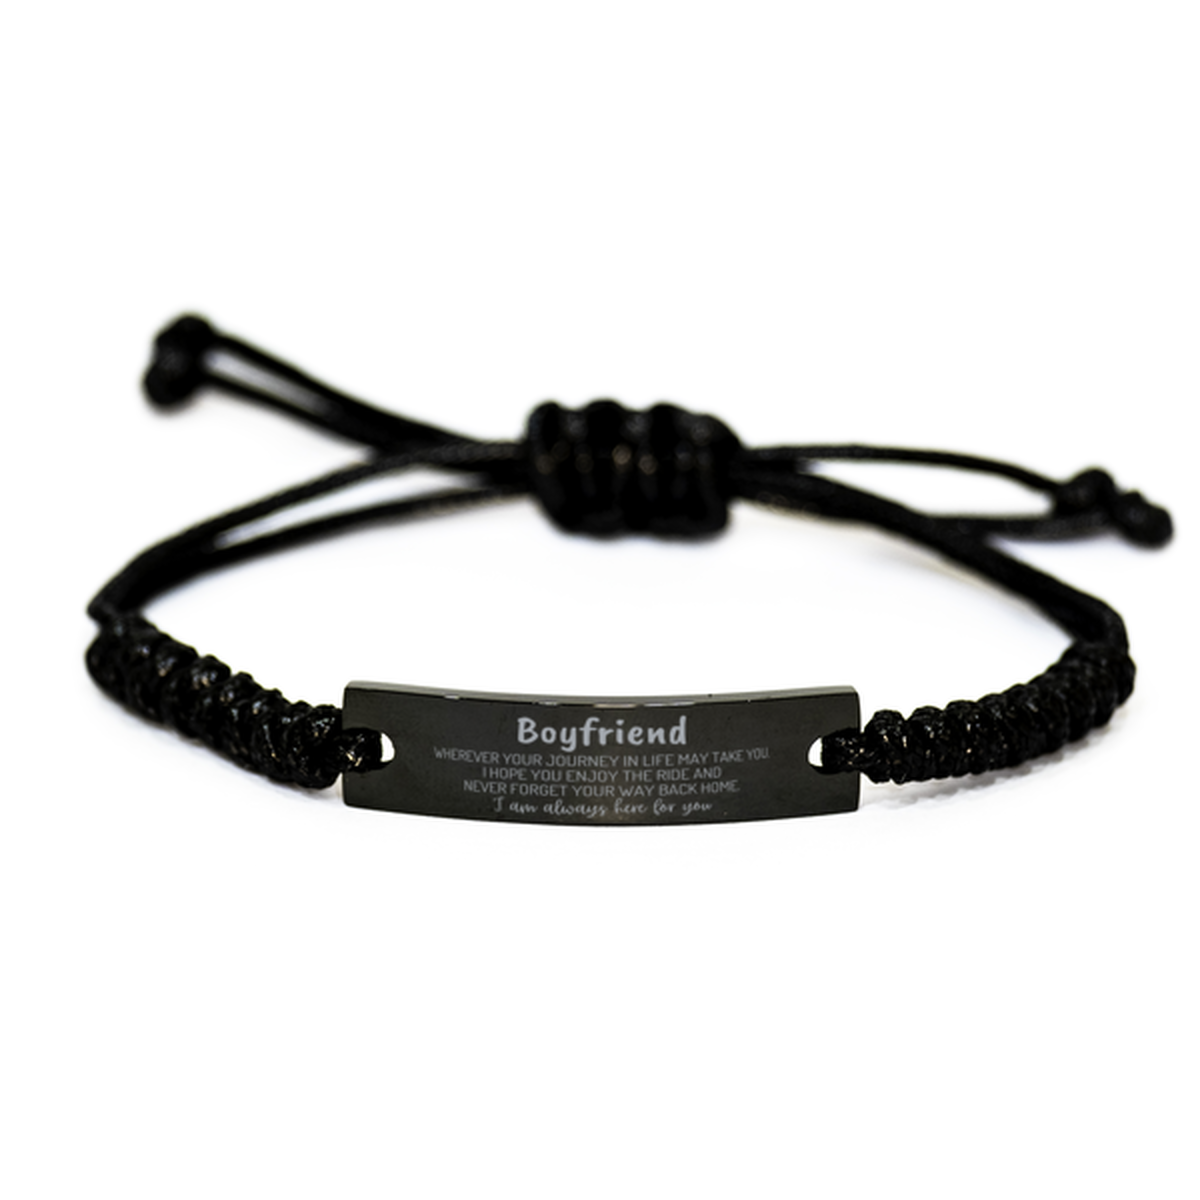 Boyfriend wherever your journey in life may take you, I am always here for you Boyfriend Black Rope Bracelet, Awesome Christmas Gifts For Boyfriend, Boyfriend Birthday Gifts for Men Women Family Loved One